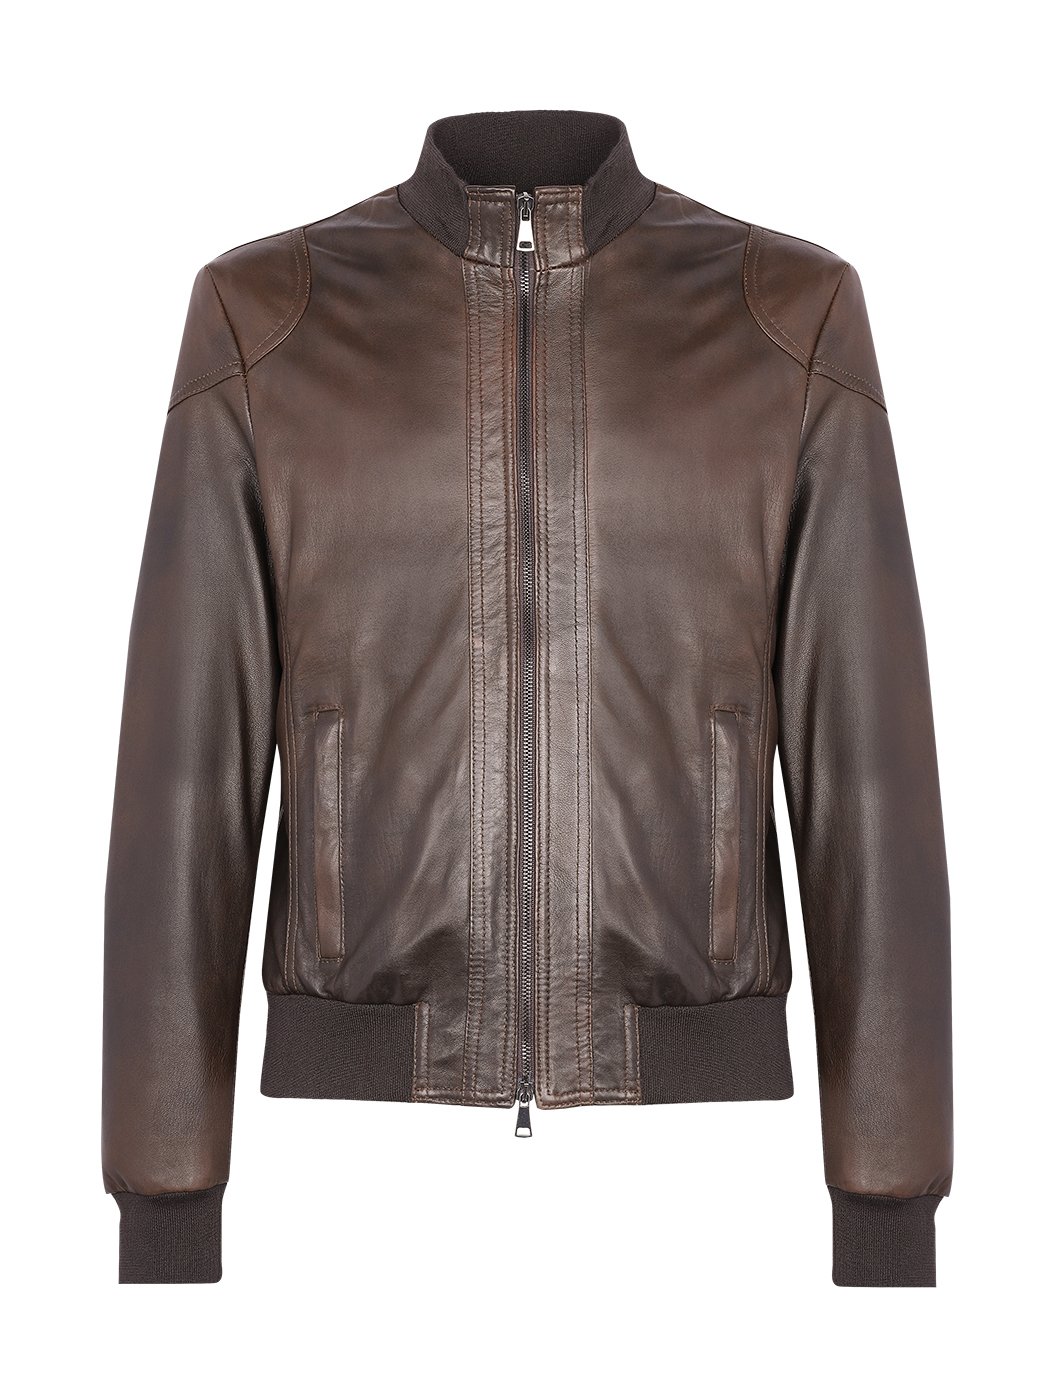 Brown leather bomber